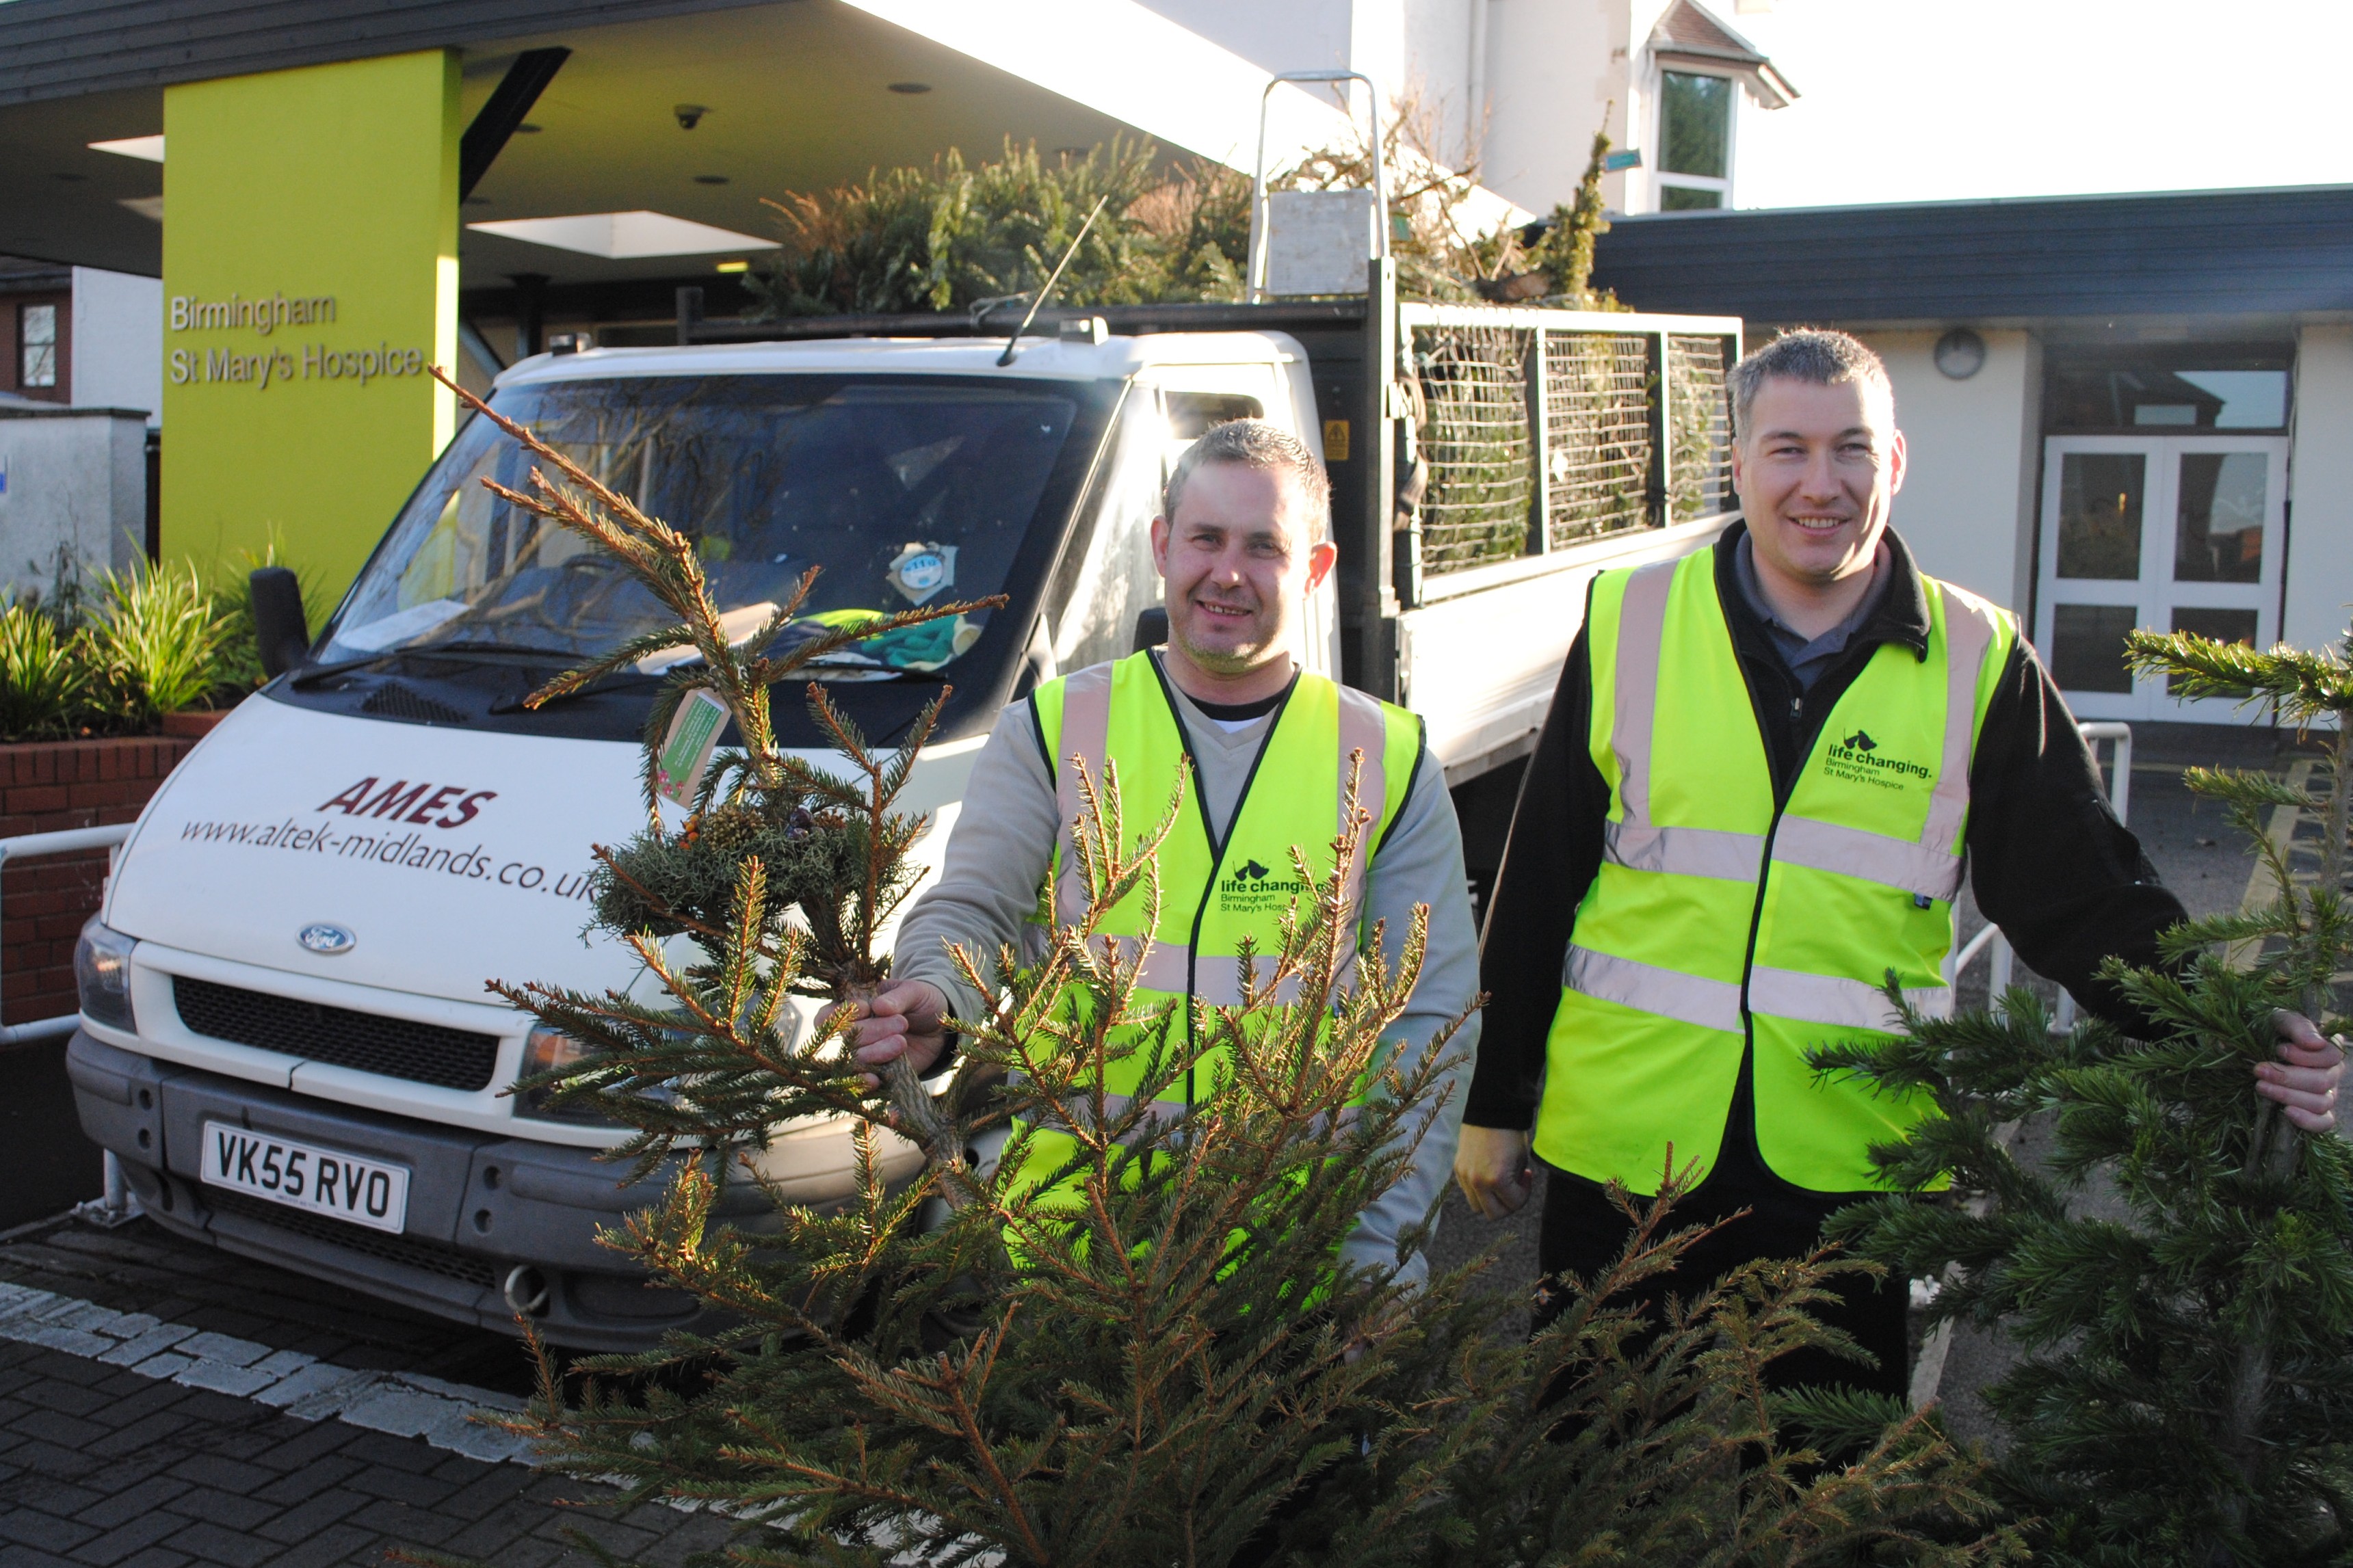 Recycling Christmas trees with St Mary's Hospice in Birmingham